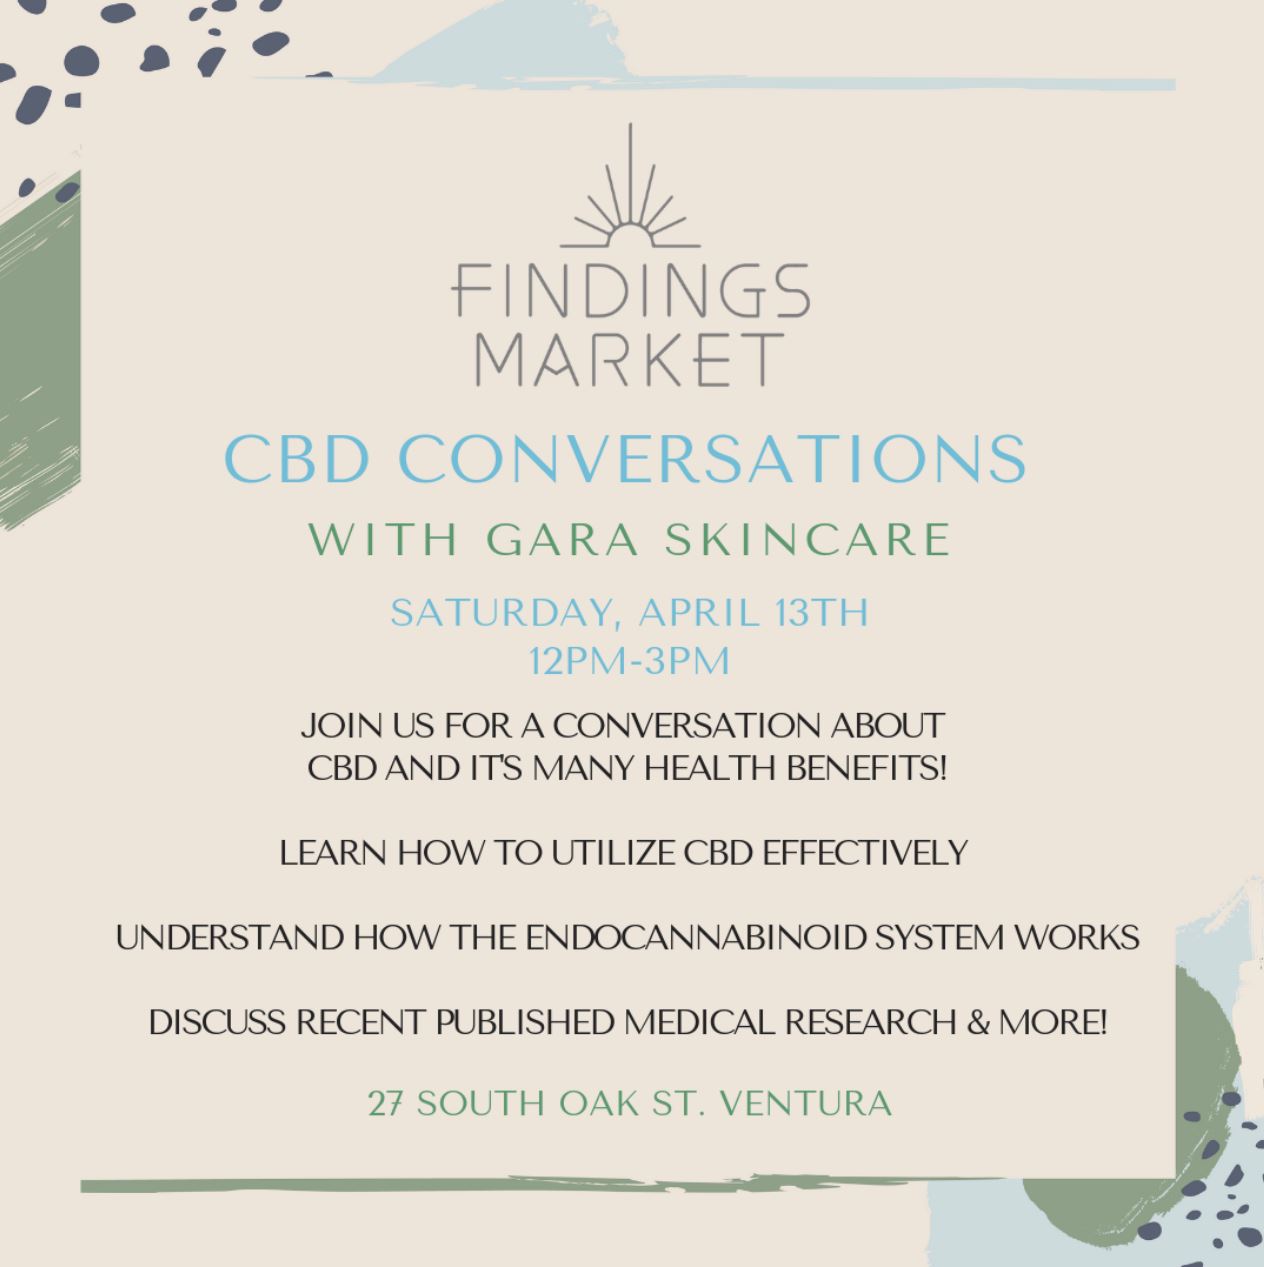 cbd skincare conversations with findings market